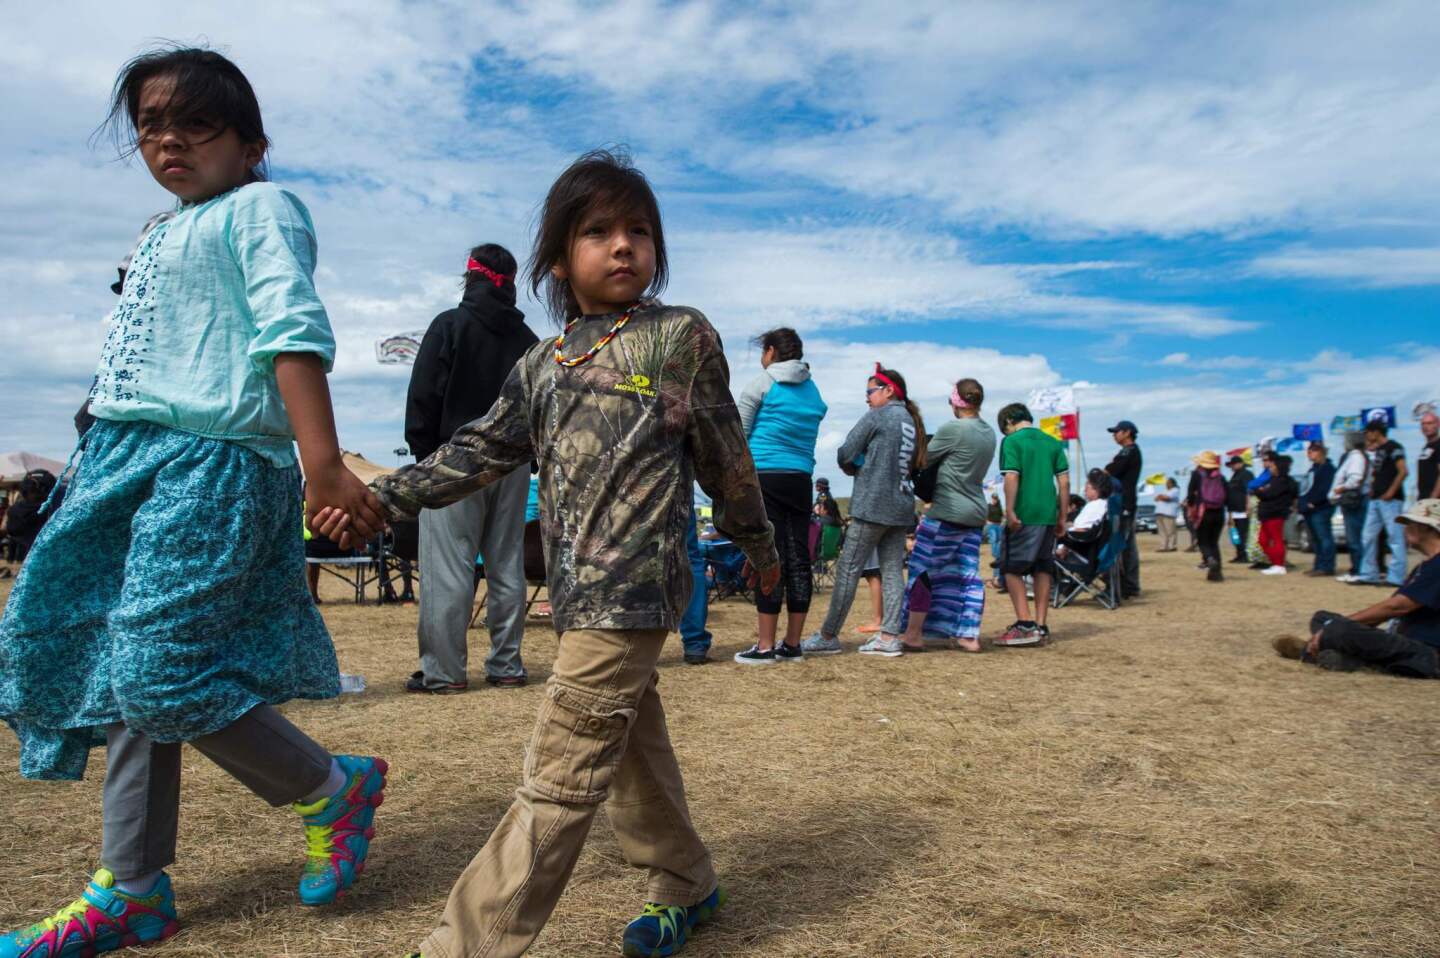 Two children walk together in an oil pipeline protest encampment near Cannon Ball, N.D., where members of a Native American tribe and their supporters have gathered to voice their opposition to the Dakota Access Pipeline.